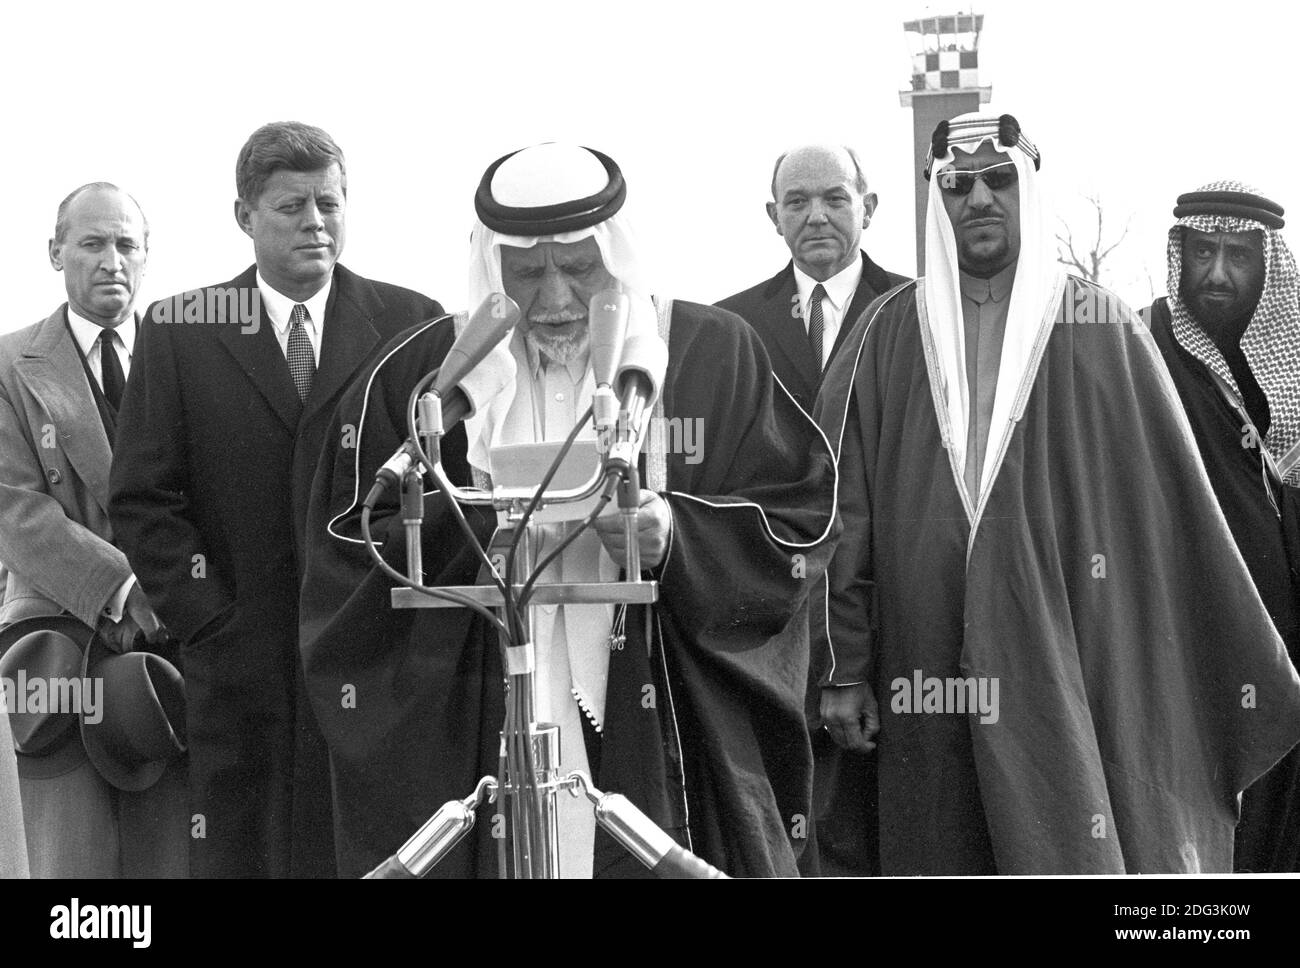 King Saud bin Abdulaziz Al Saud of Saudi Arabia makes remarks as he is welcomed to the United States by US President John F. Kennedy during a ceremony at Andrews Air Force Base, Maryland on February 13, 1962. From left to right: unidentified, President Kennedy, King Saud, US Secretary of State Dean Rusk, unidentified, and unidentified.Photo by Arnie Sachs / CNP /ABACAPRESS.COM Stock Photo